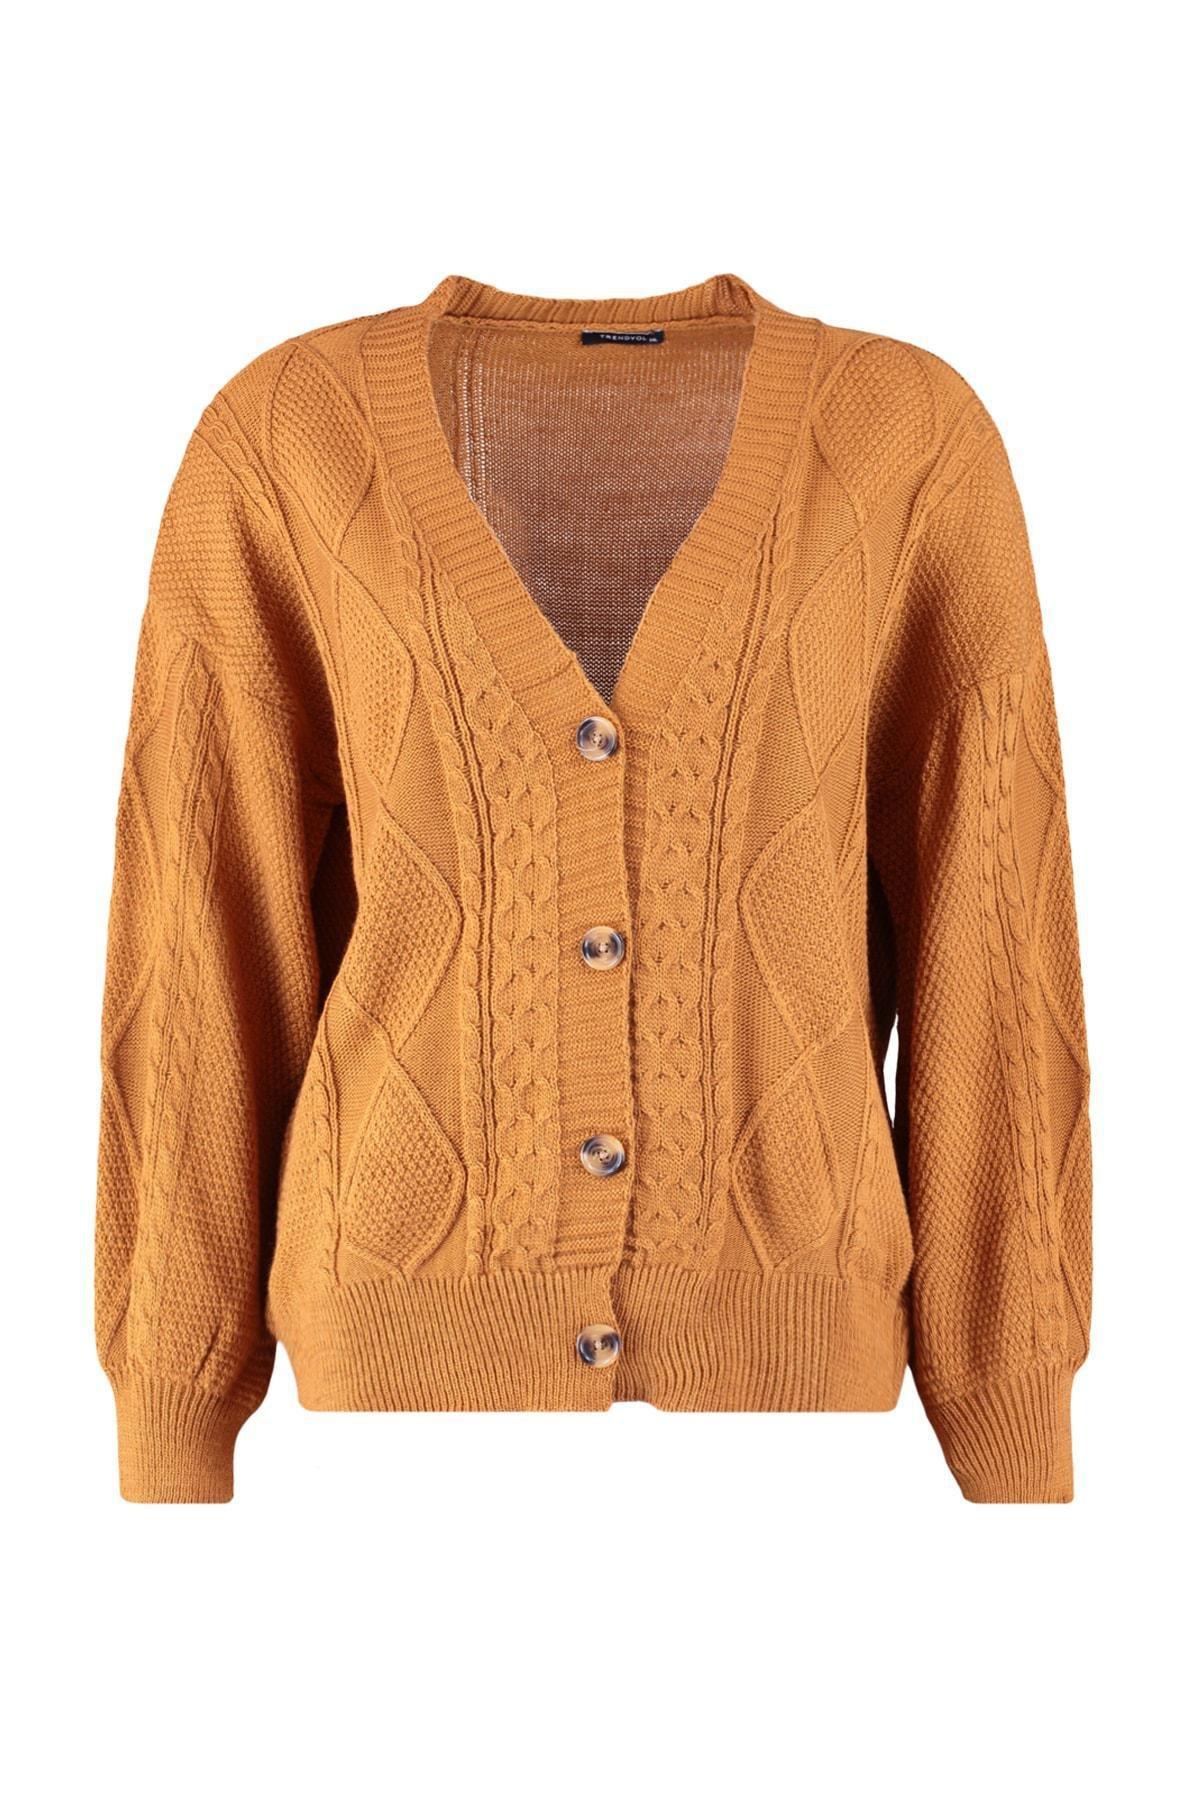 Trendyol - Brown Relaxed Knitted Plus Size Cardigan